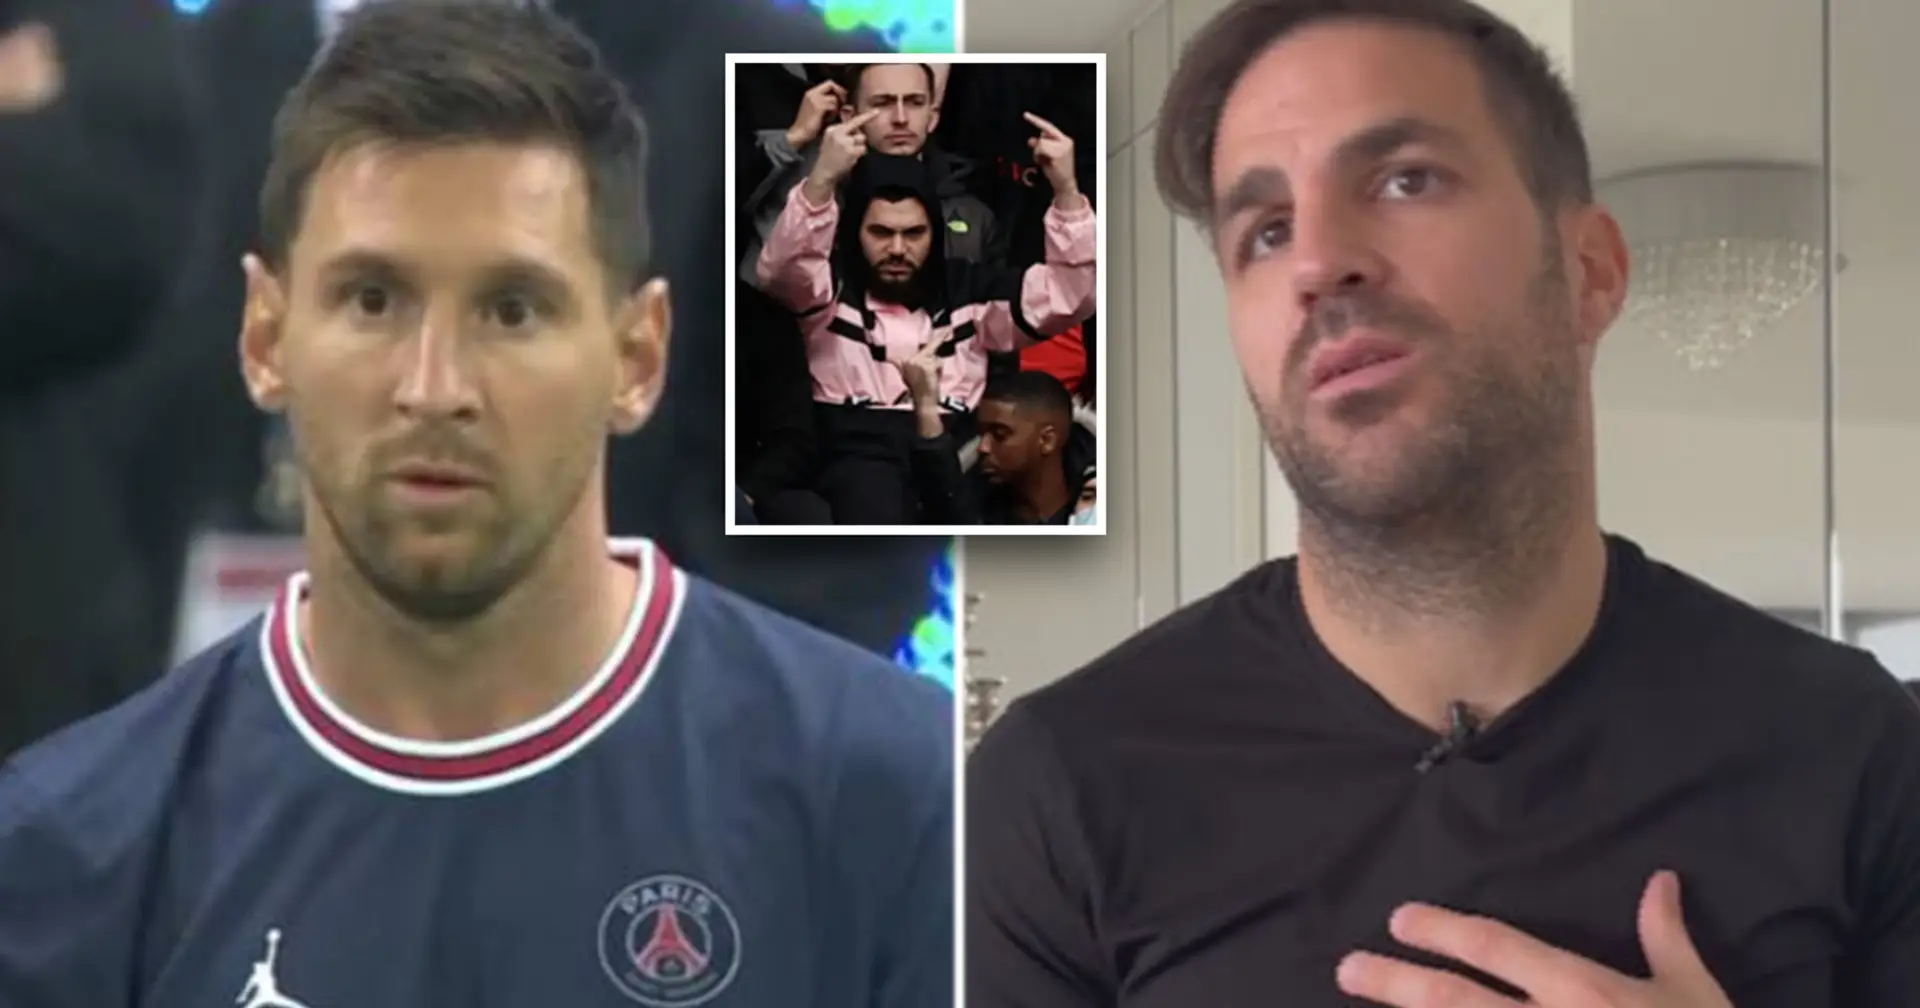 'I was whistled at Camp Nou. I know what it means': Fabregas on PSG fans booing Messi